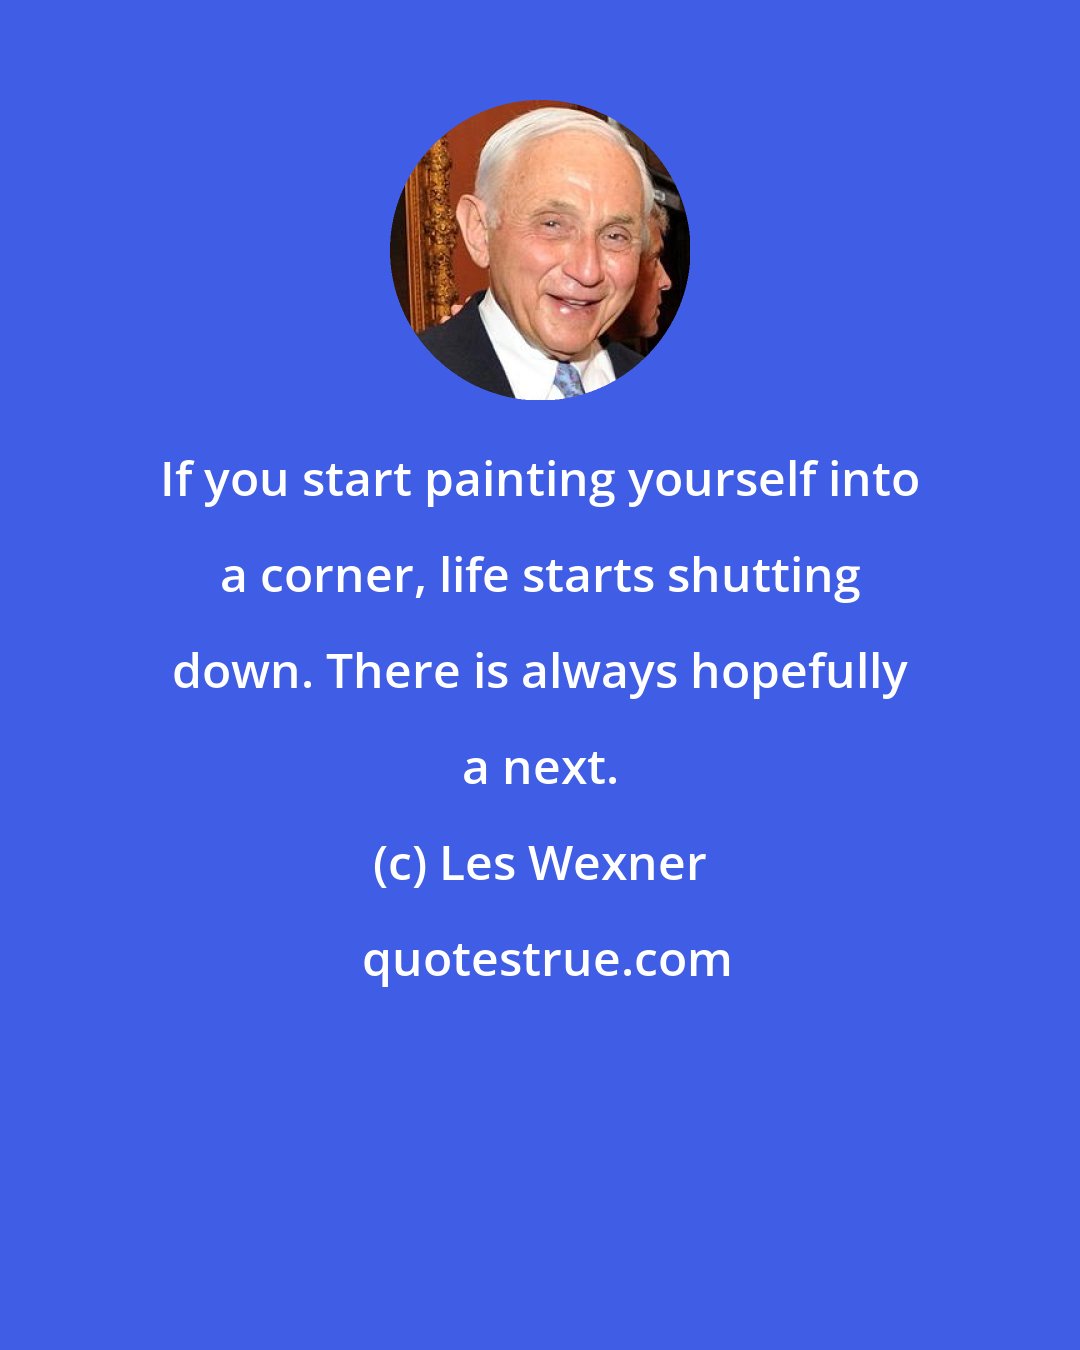 Les Wexner: If you start painting yourself into a corner, life starts shutting down. There is always hopefully a next.